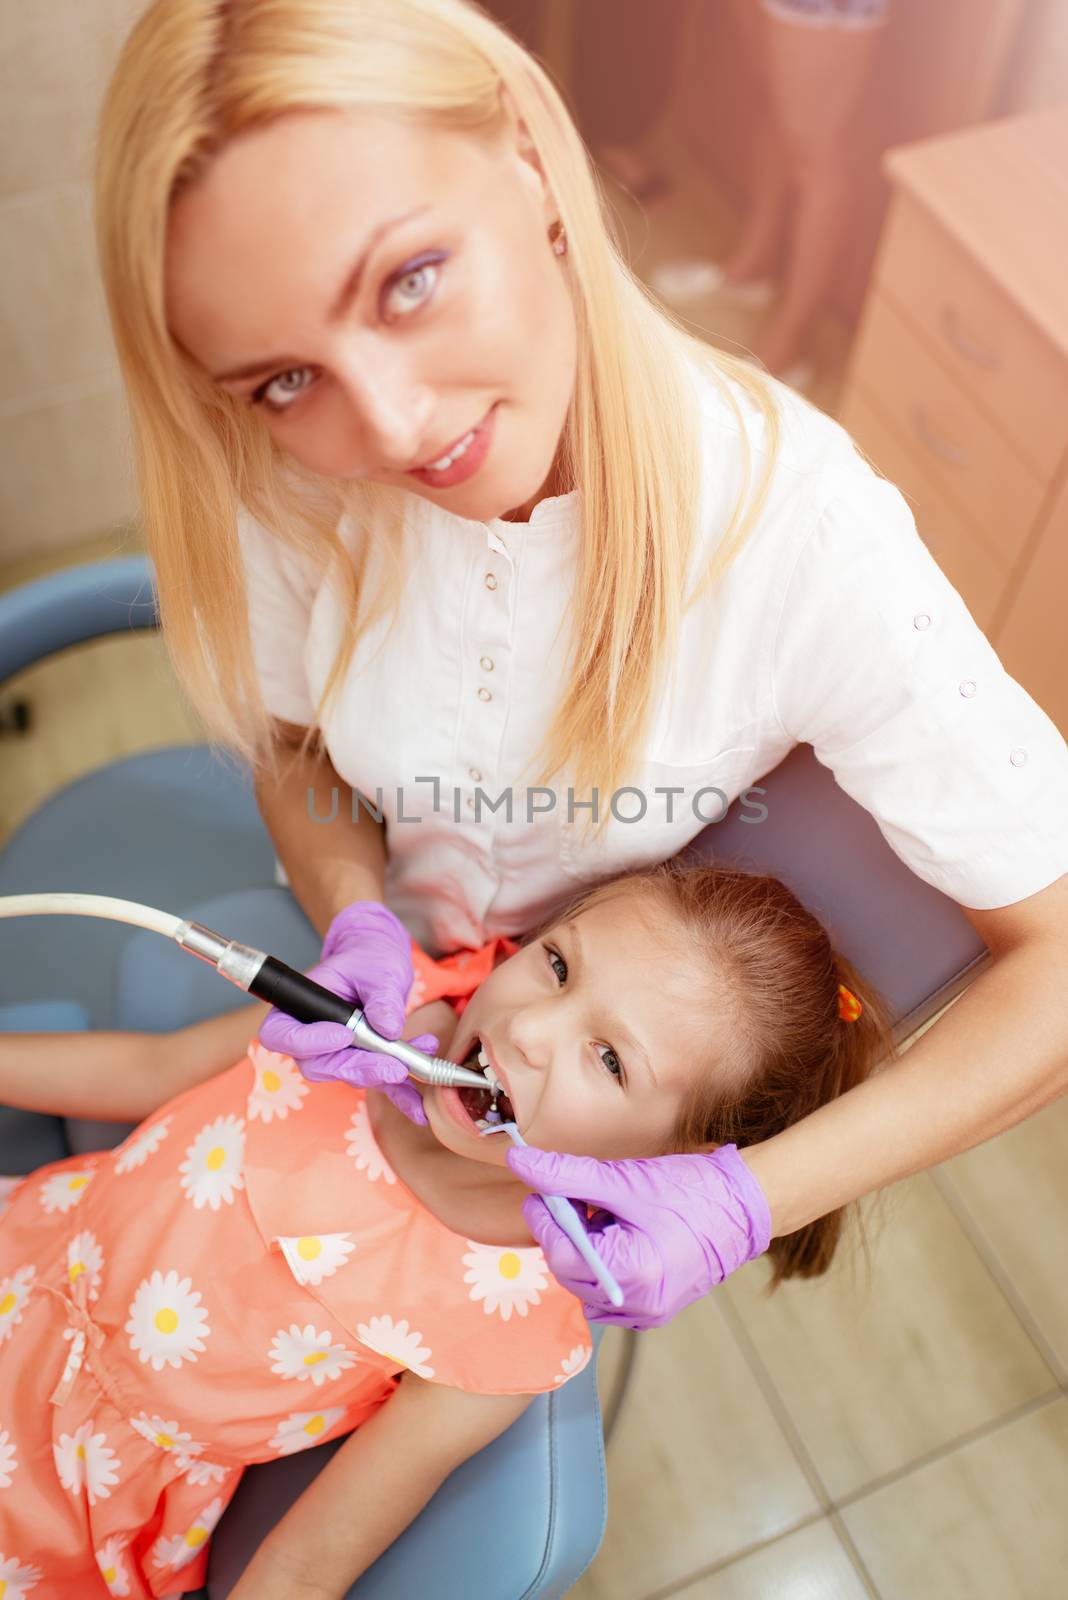 Beautiful little girl at visit in the dentist office. She is sitting on a chair and dentist polished teeth on her. Top view.